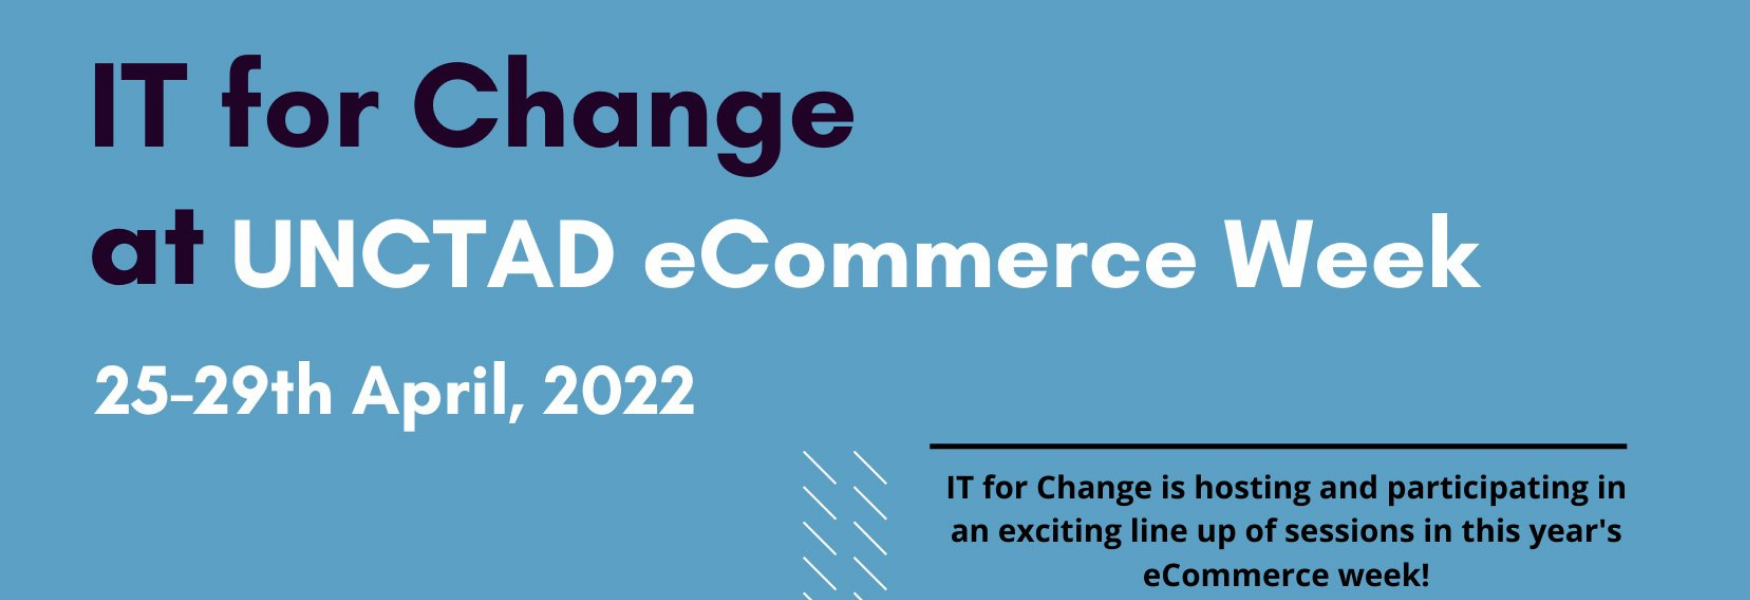 IT for Change at UNCTAD eCommerce Week